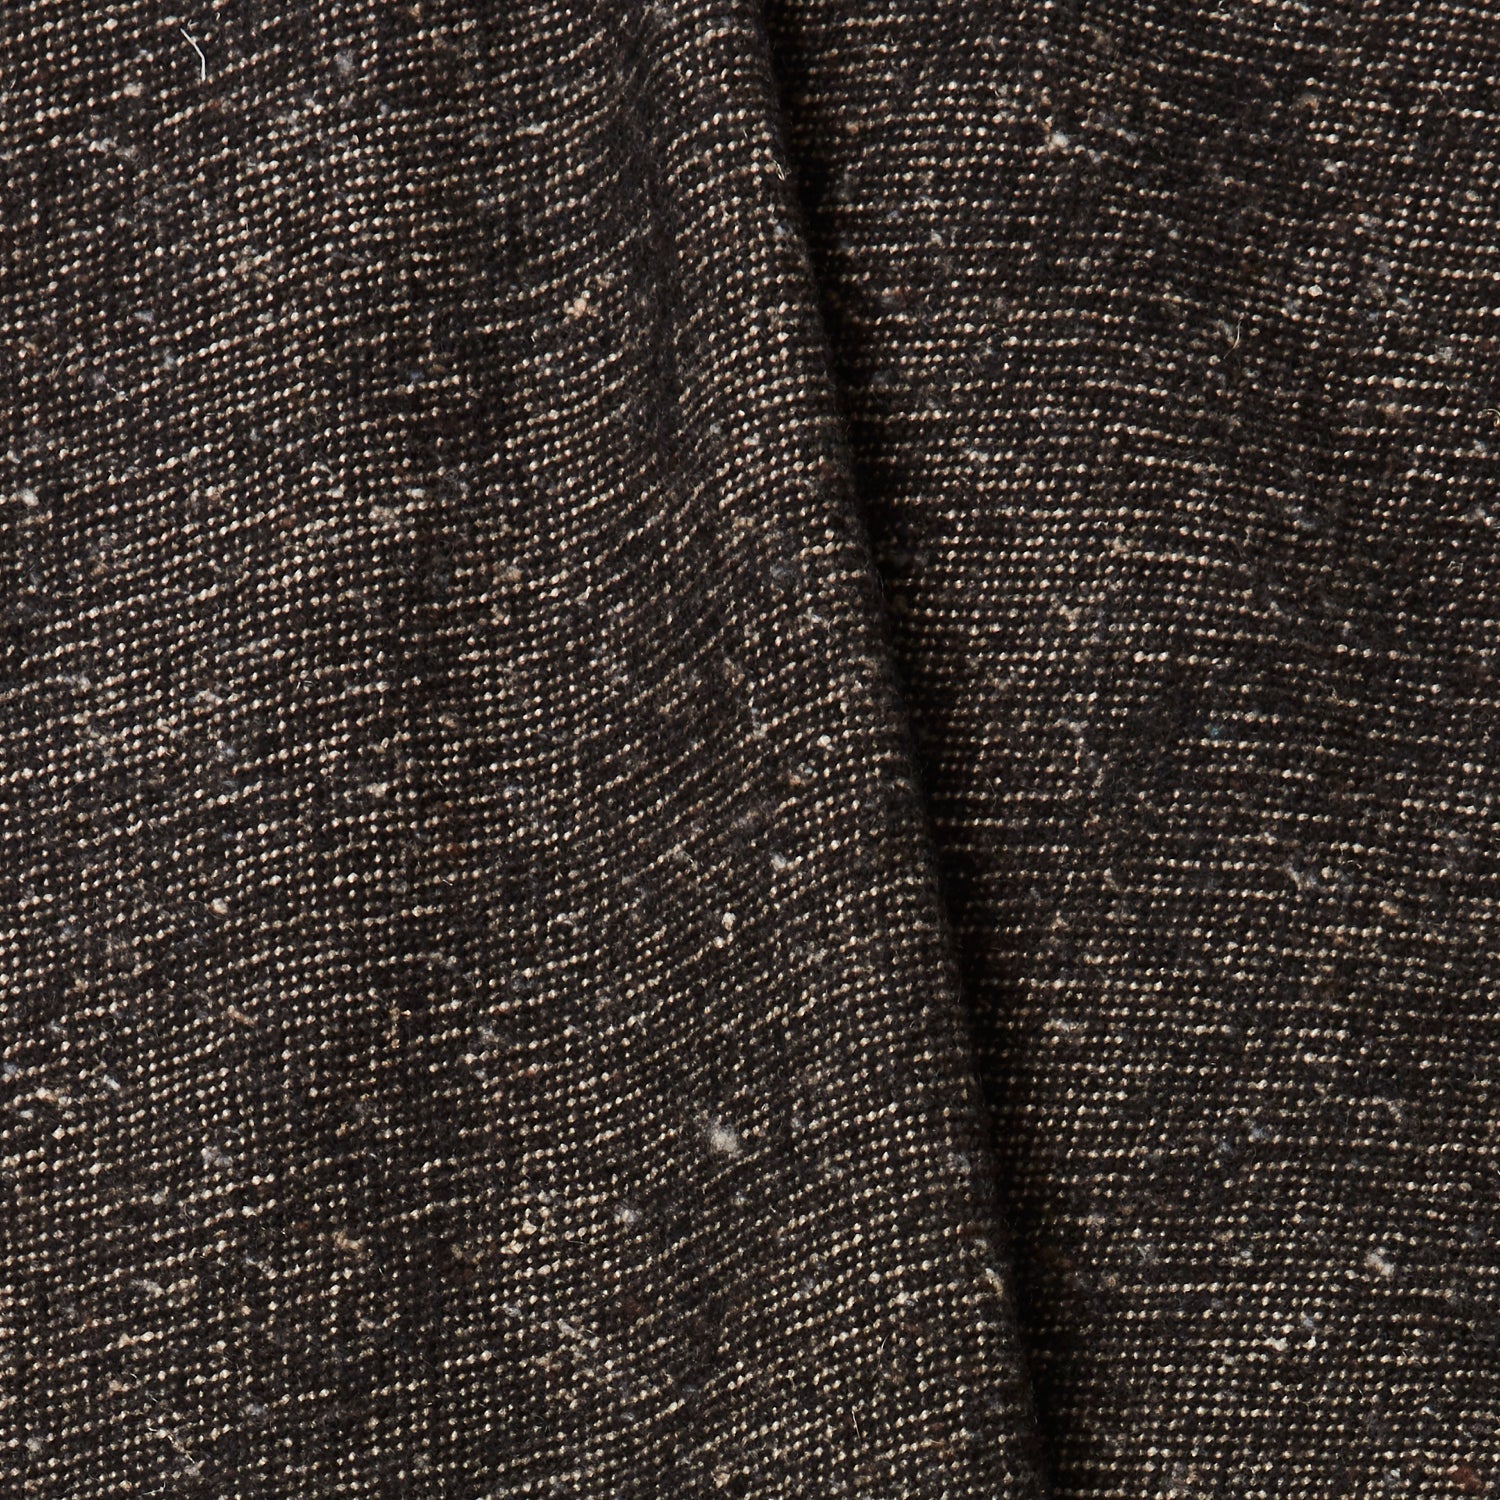 A draped swatch of blended linen-wool mix fabric in a flecked black color.